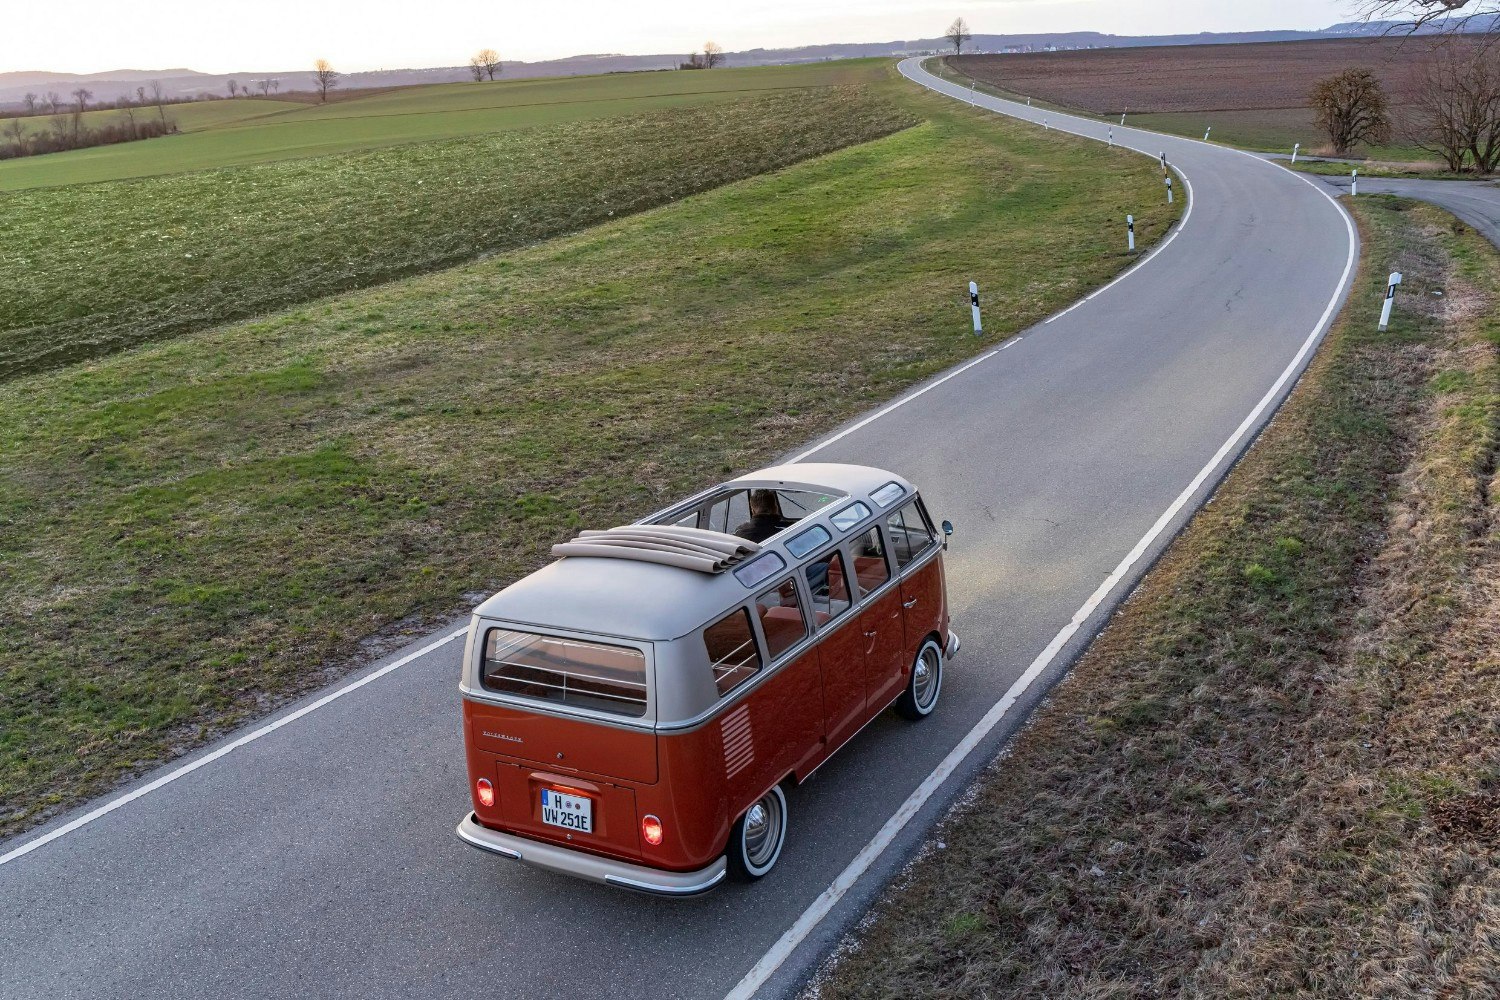 The VW e-Bulli electric bus out on the road